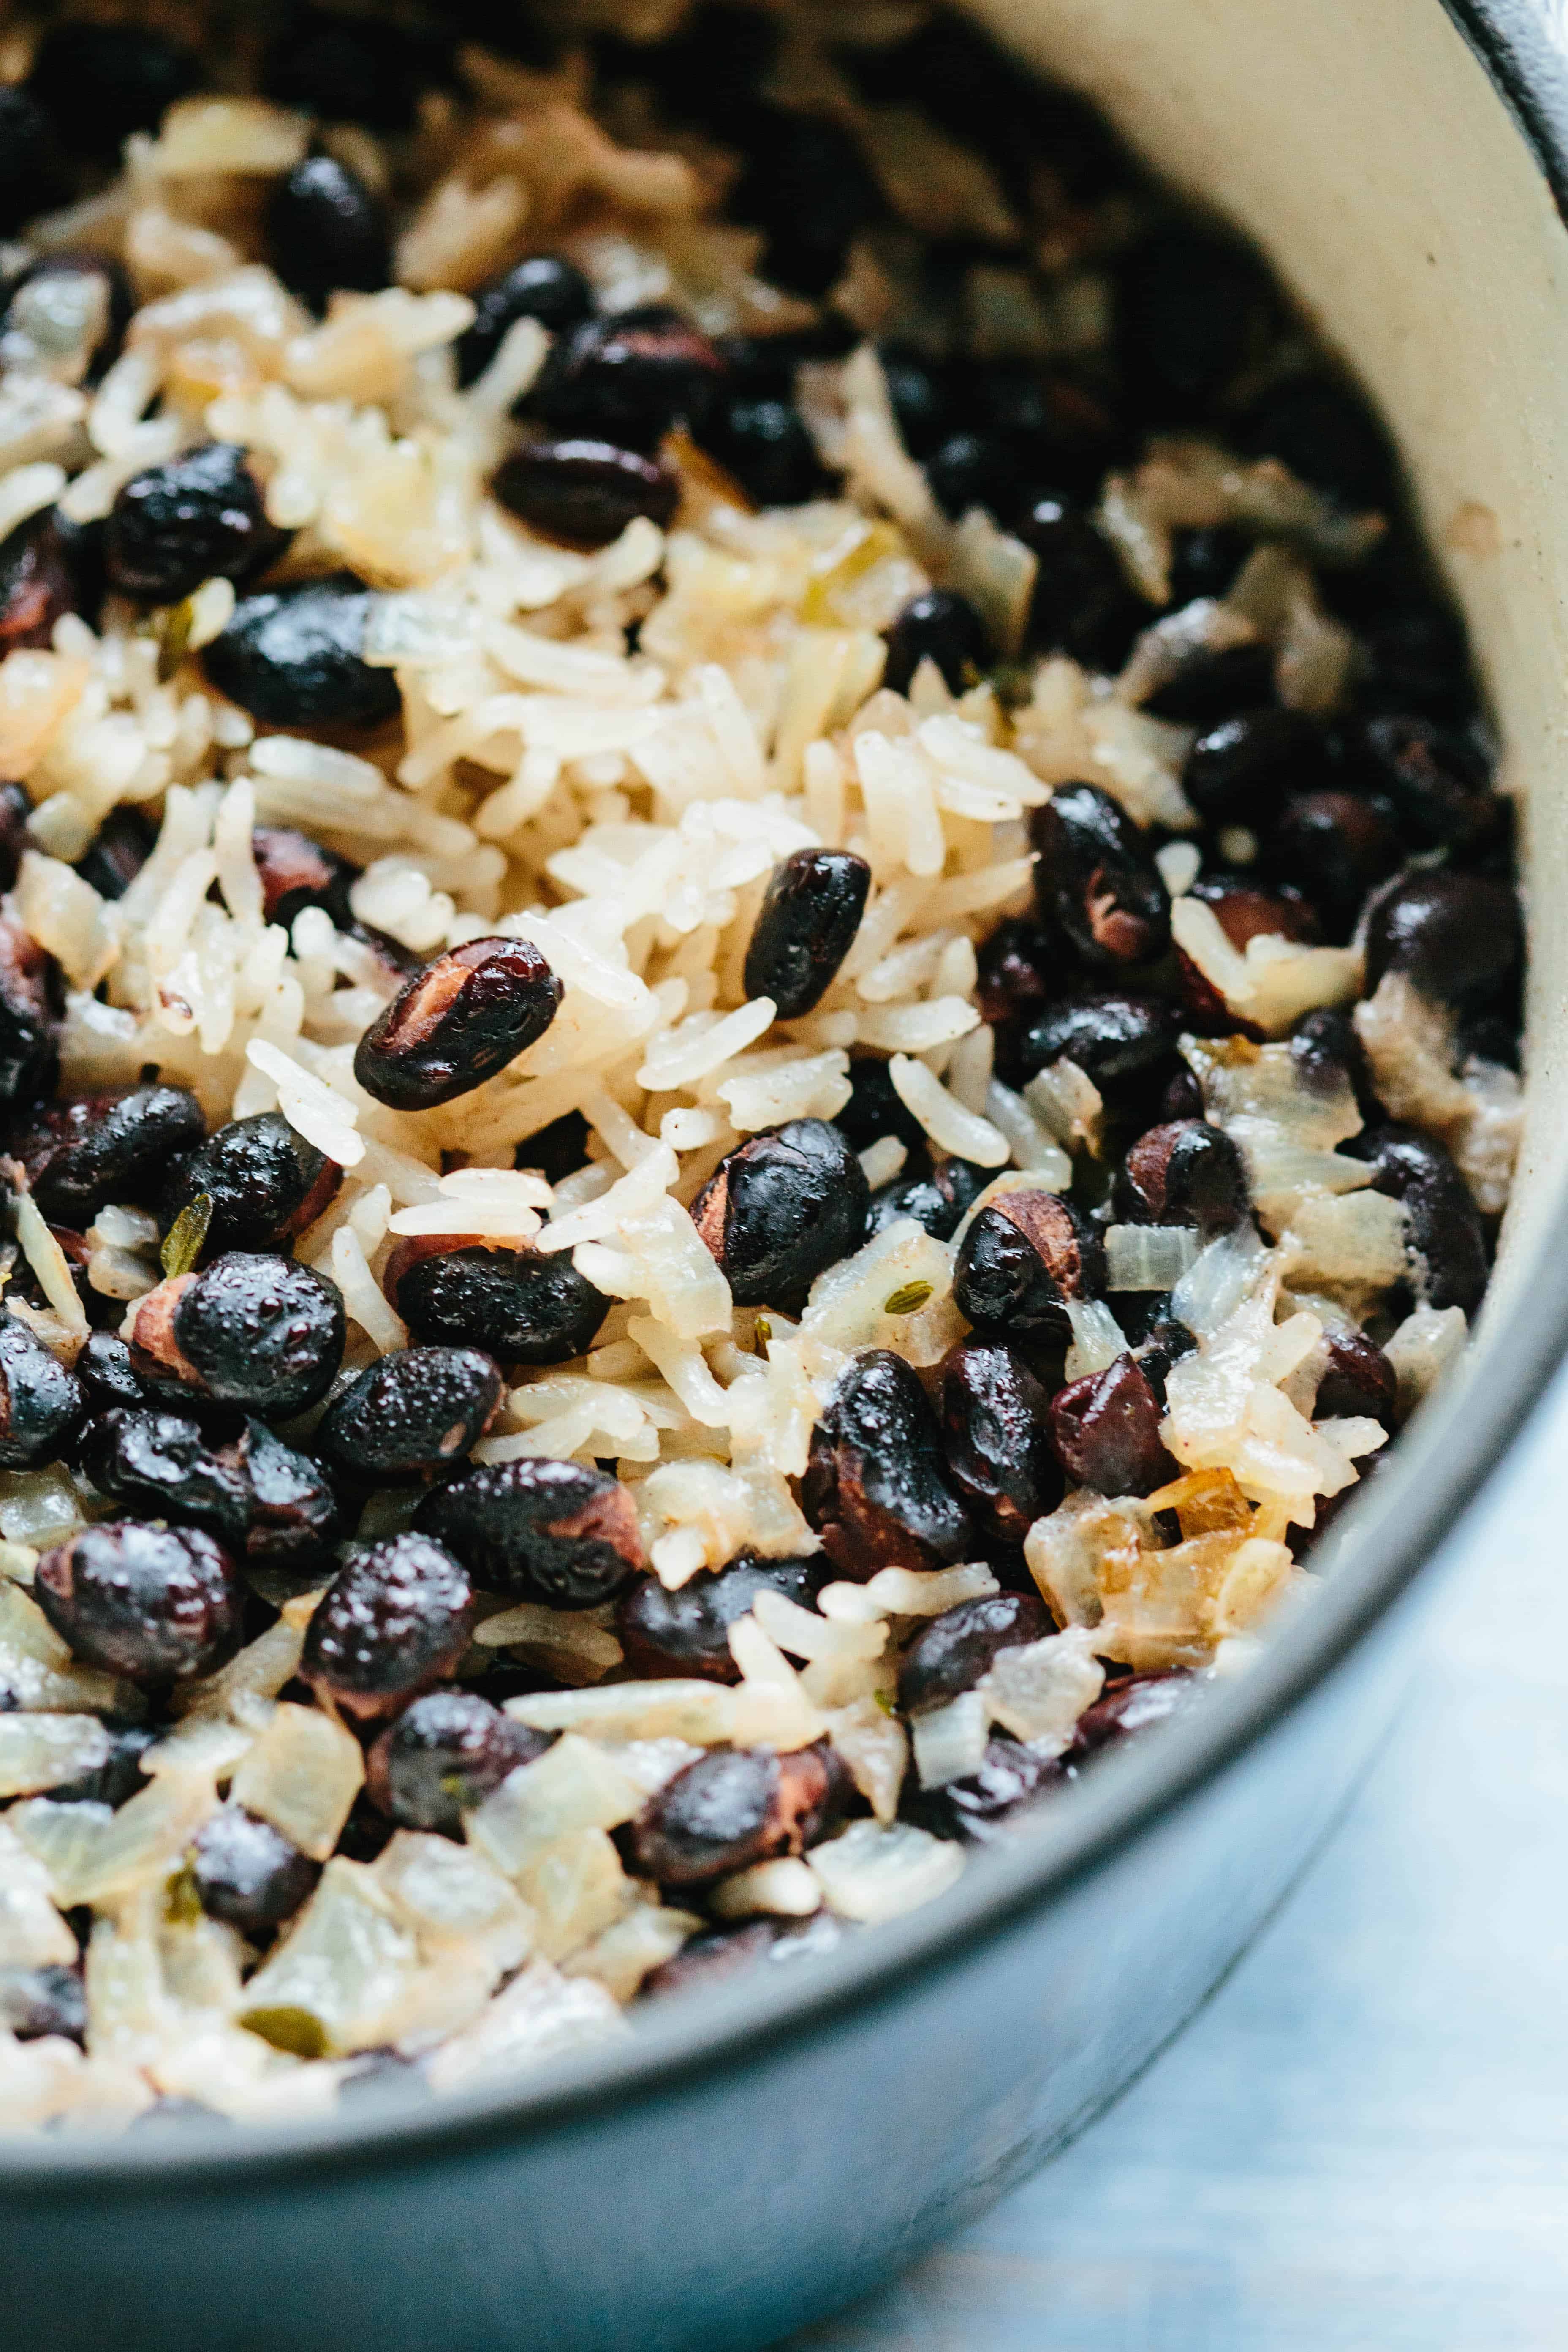 A close up of black beans and rice